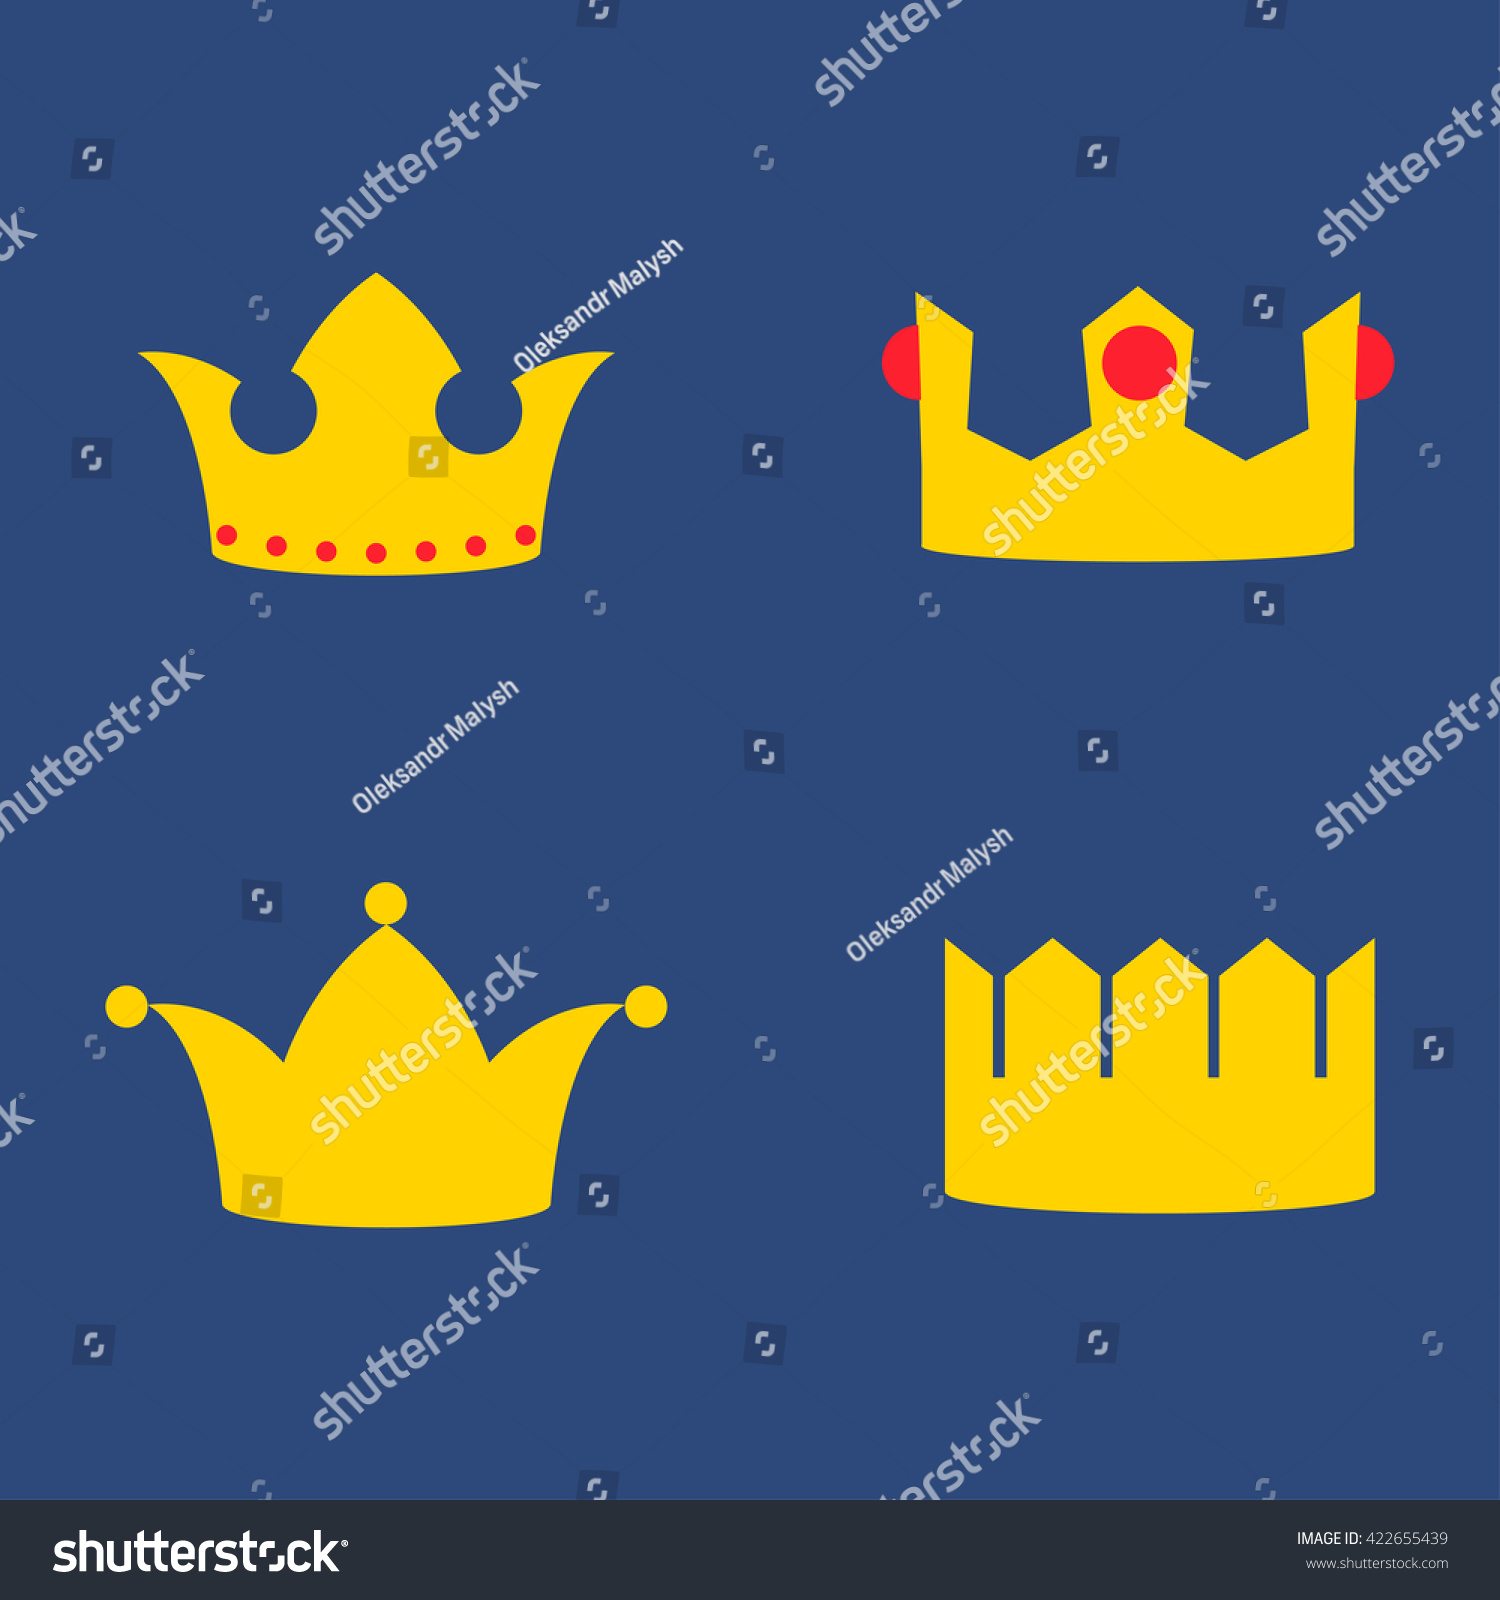 Gold Crowns Set - Set Of Gold Icons Stock Photo 422655439 : Shutterstock